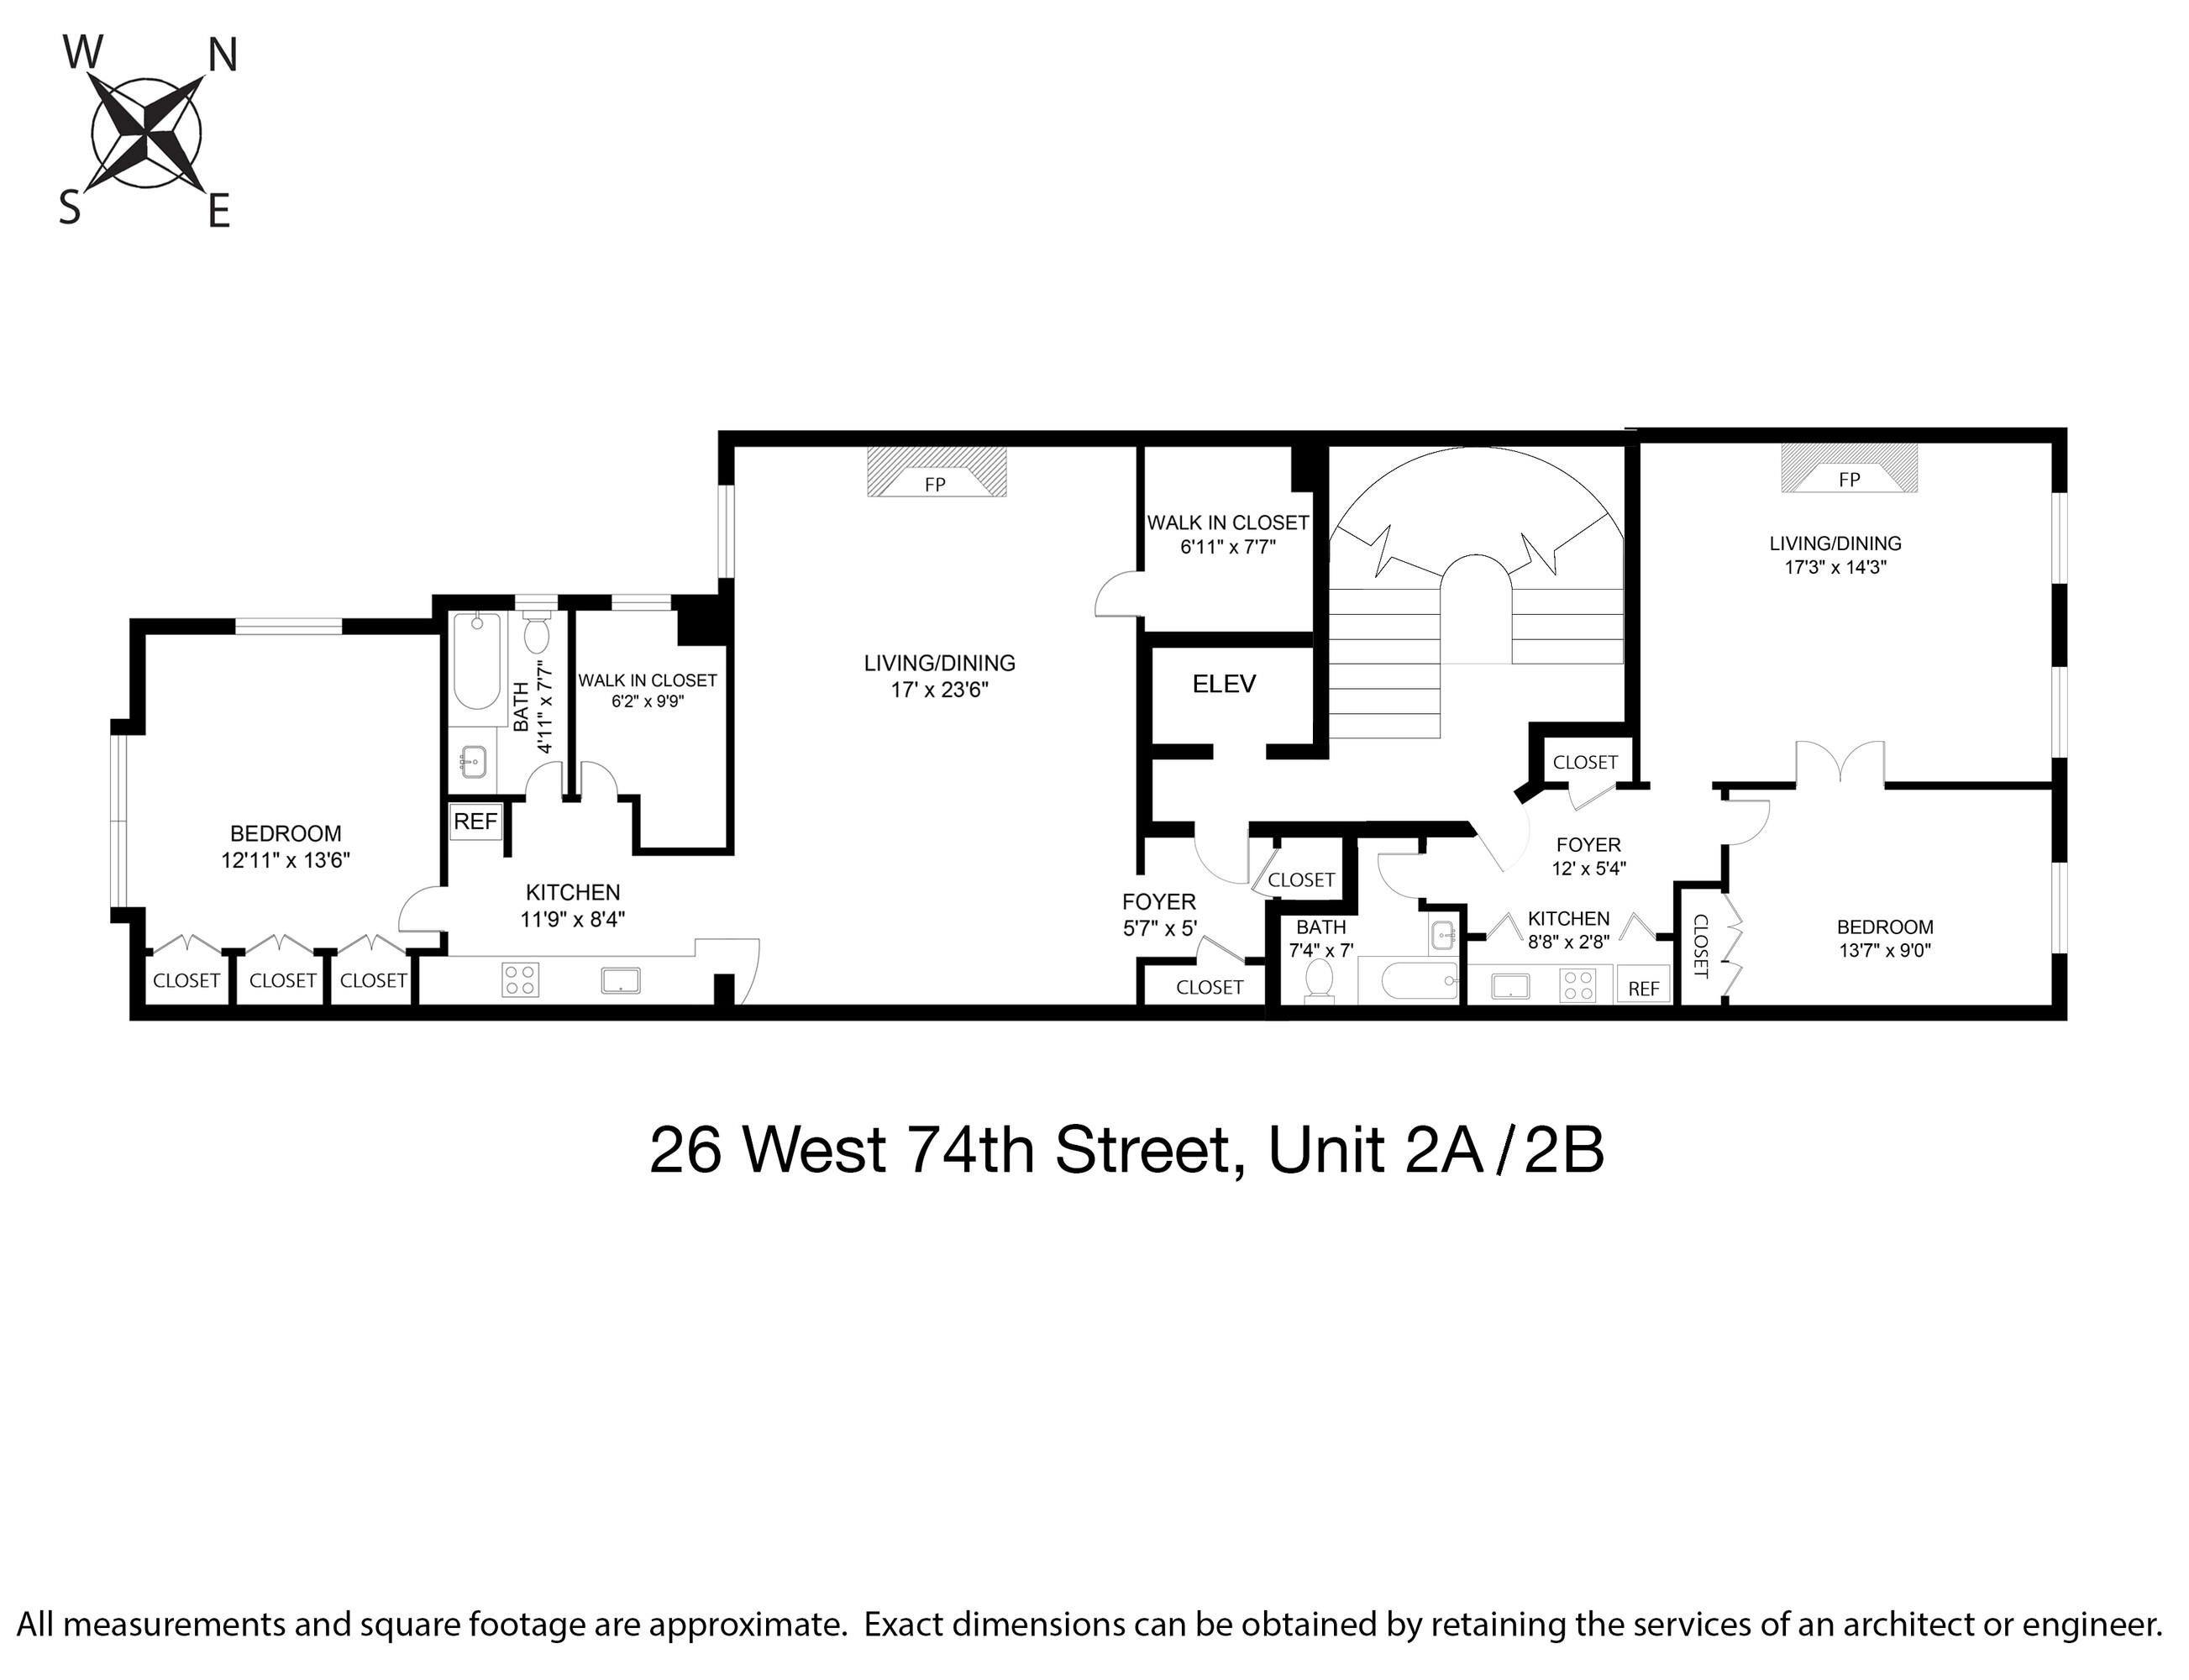 26 West 74th Street Upper West Side New York NY 10023